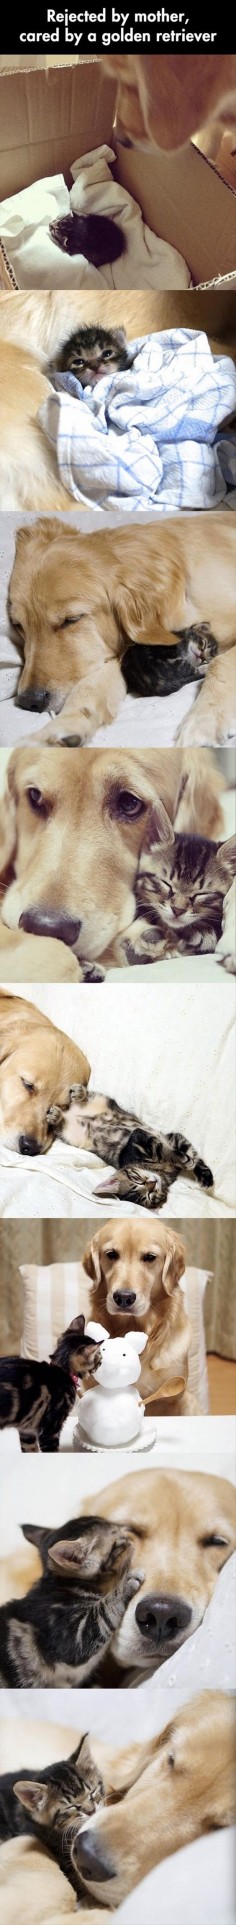 #Cat rejected by its #mother, cared for by a golden  Awww so cute -